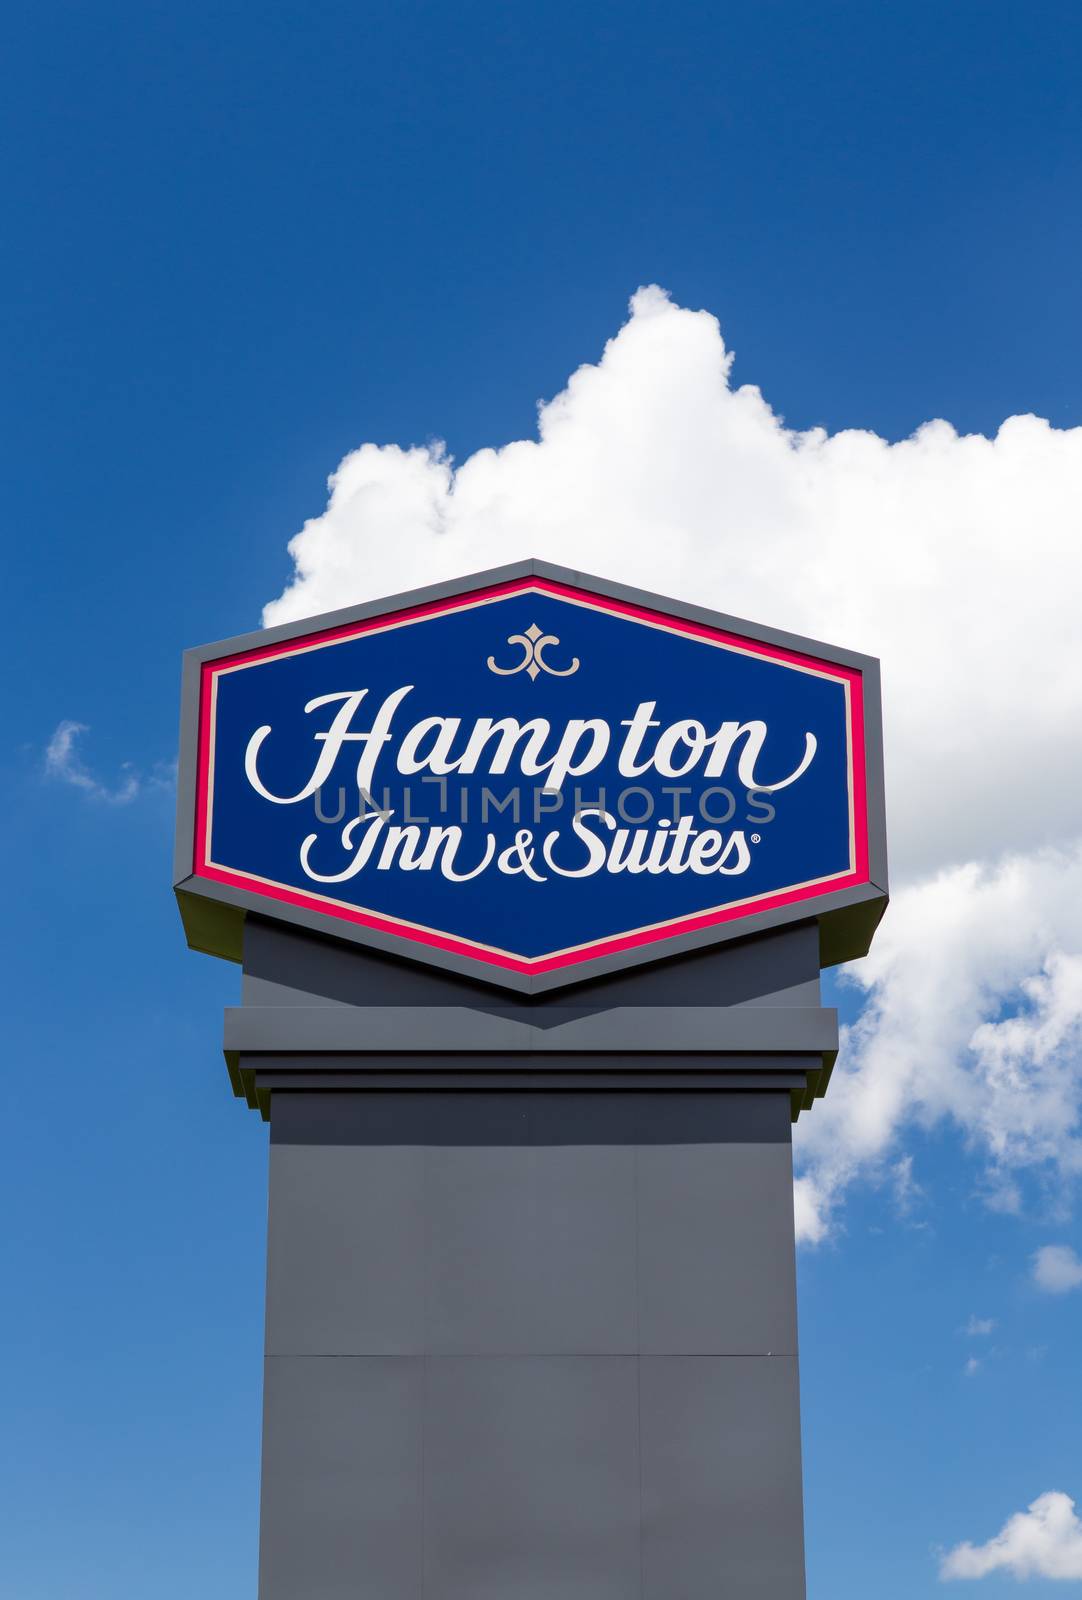 BLOOMINGTON, MN/USA - JUNE 24, 2014: Hampton Inn and Suites sign. Hampton Inn and Suites is a brand of independently owned hotels trademarked by Hilton Worldwide.